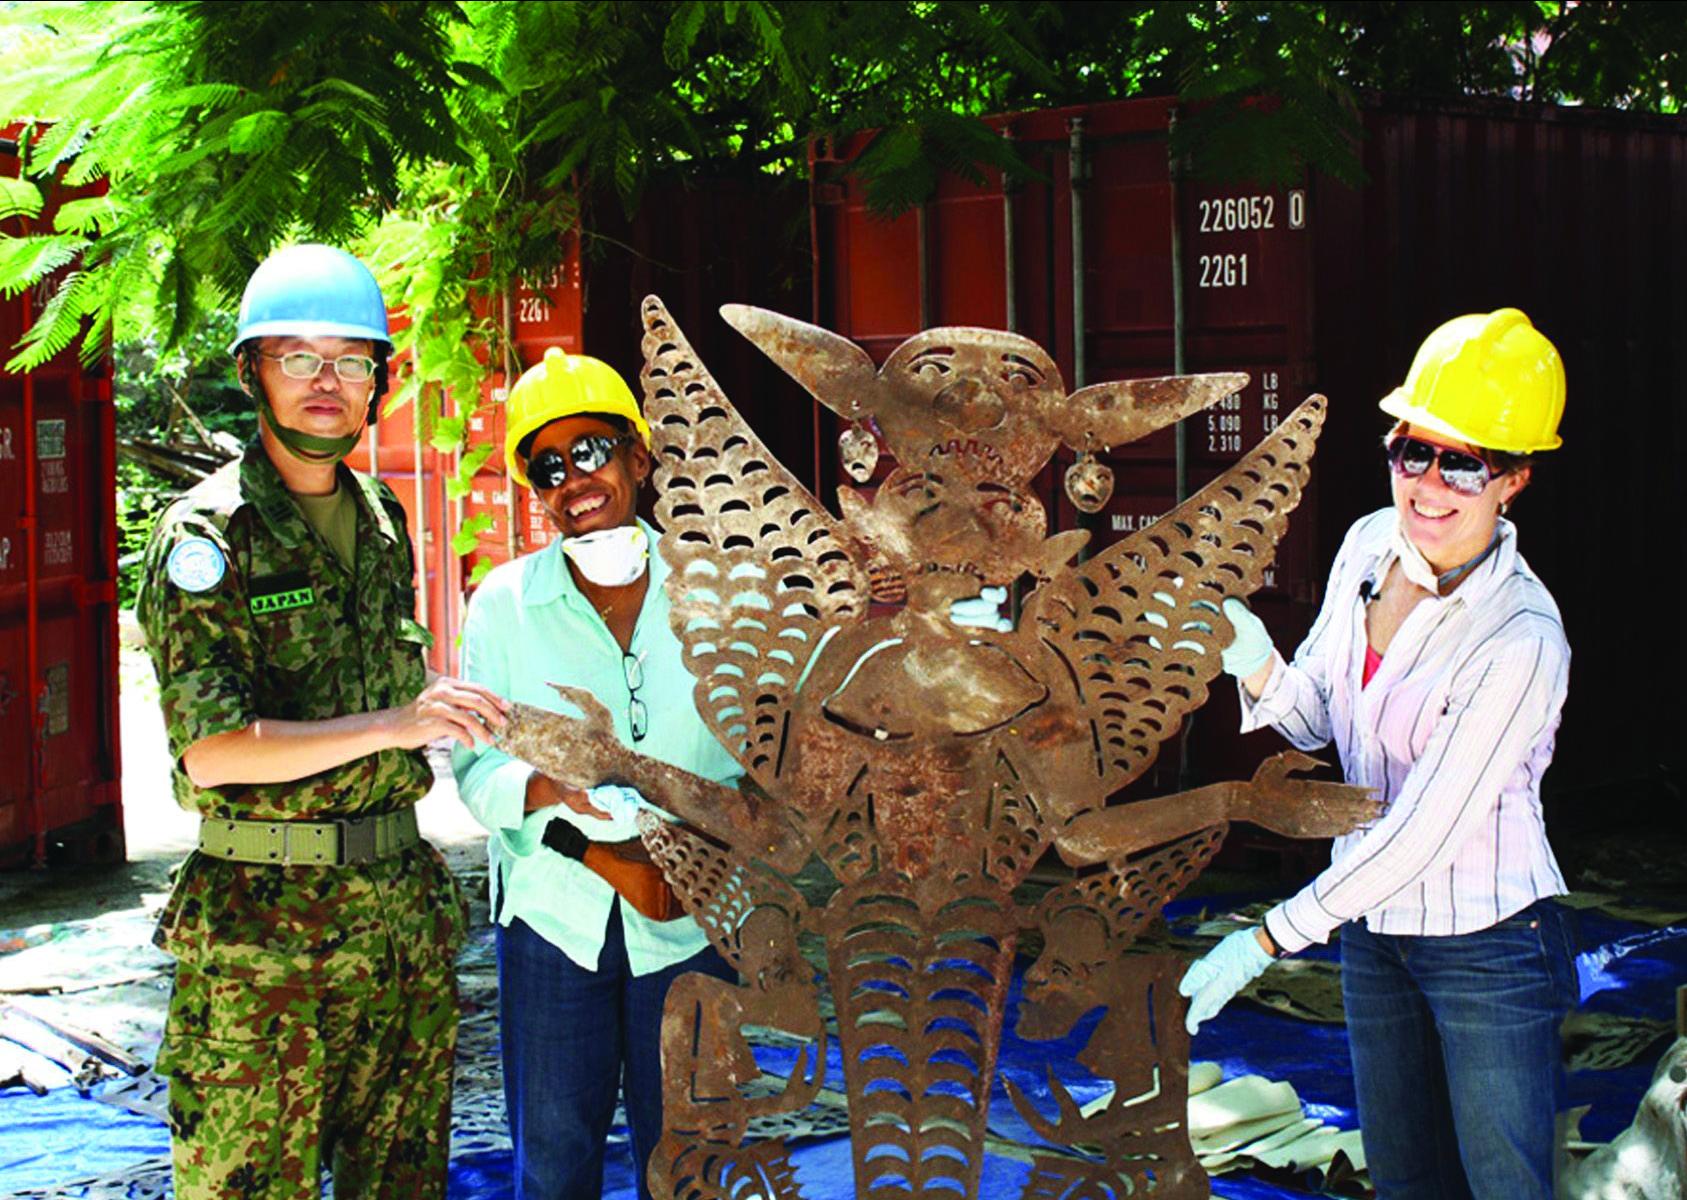 A man in military uniform wearing a blue UN helmet stands with two women in yellow hardhats holding a metal sculpture